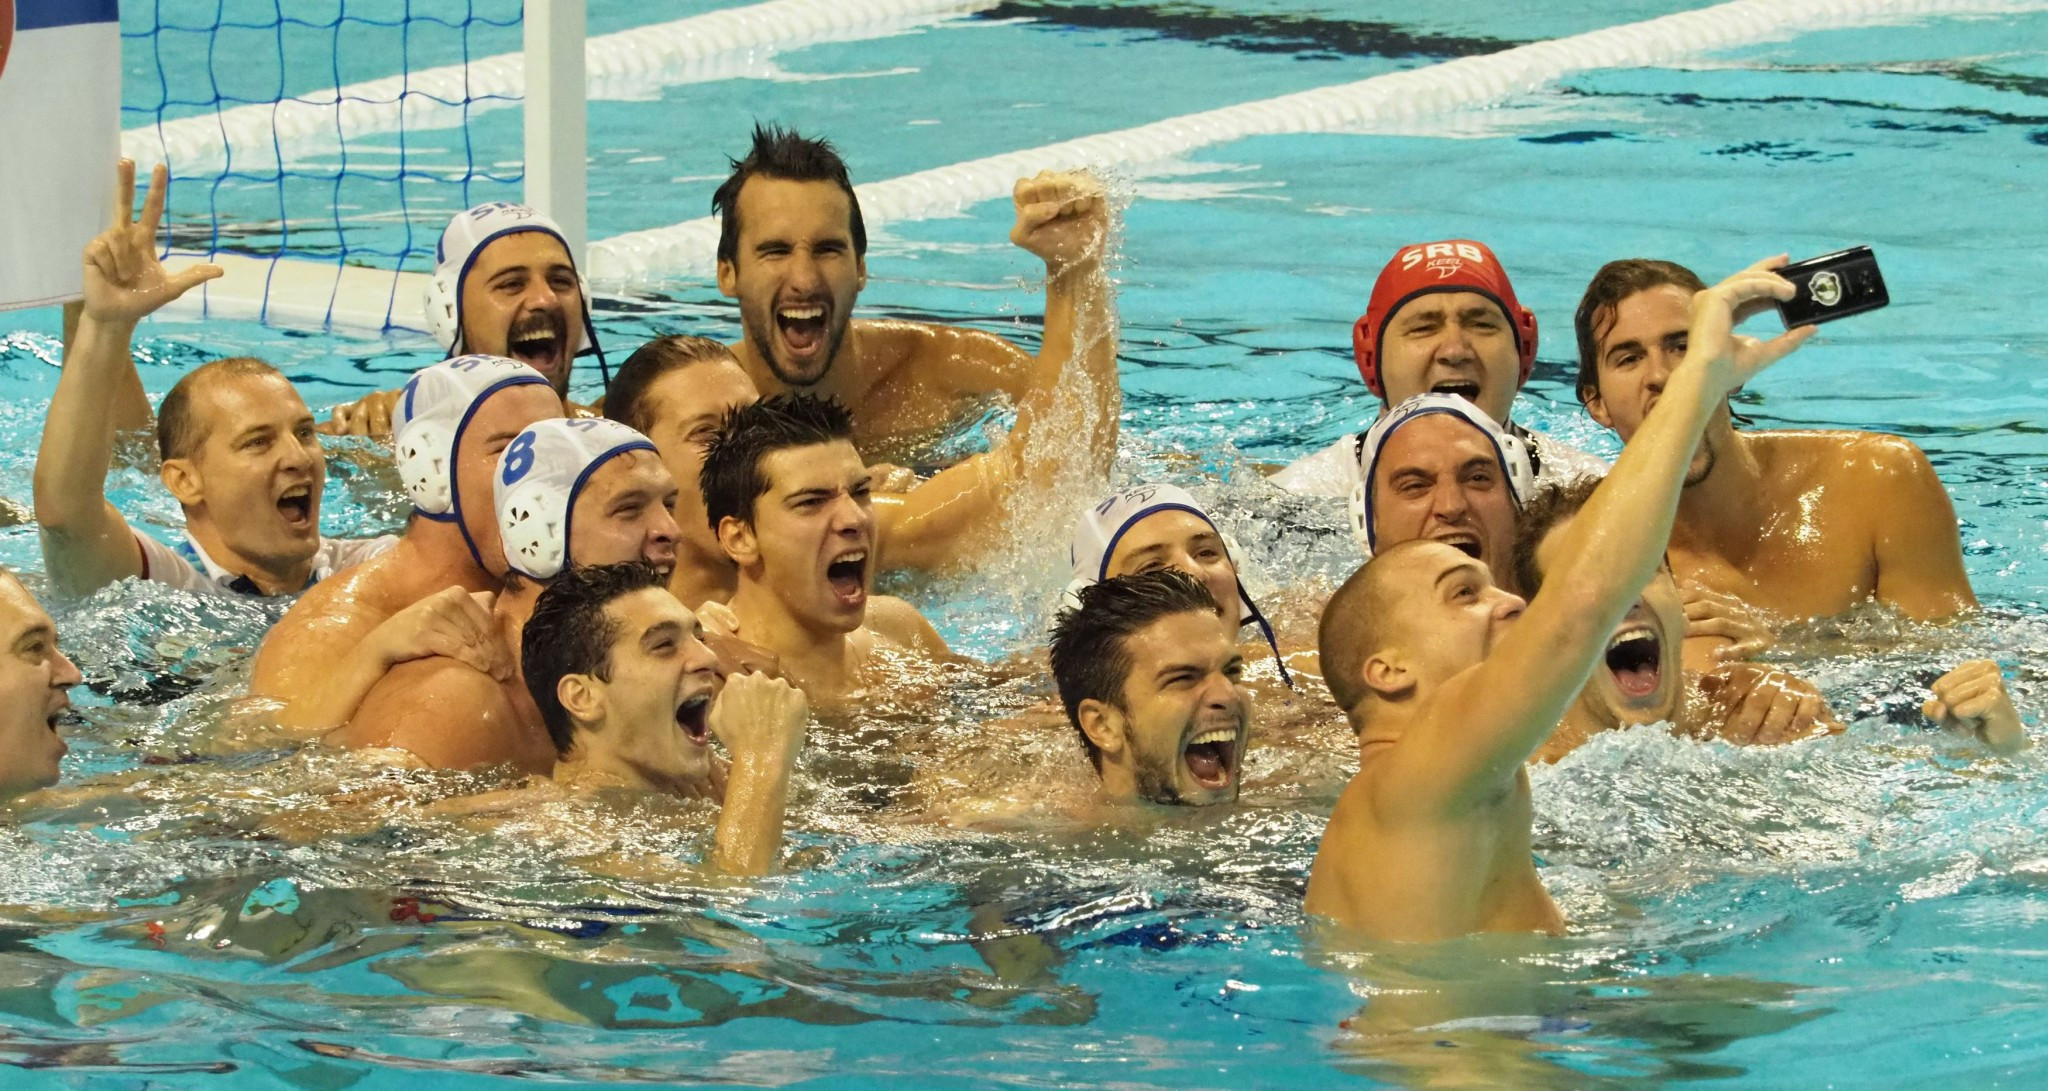 Serbia earn final gold of Taipei 2017 as Japan top overall medals table